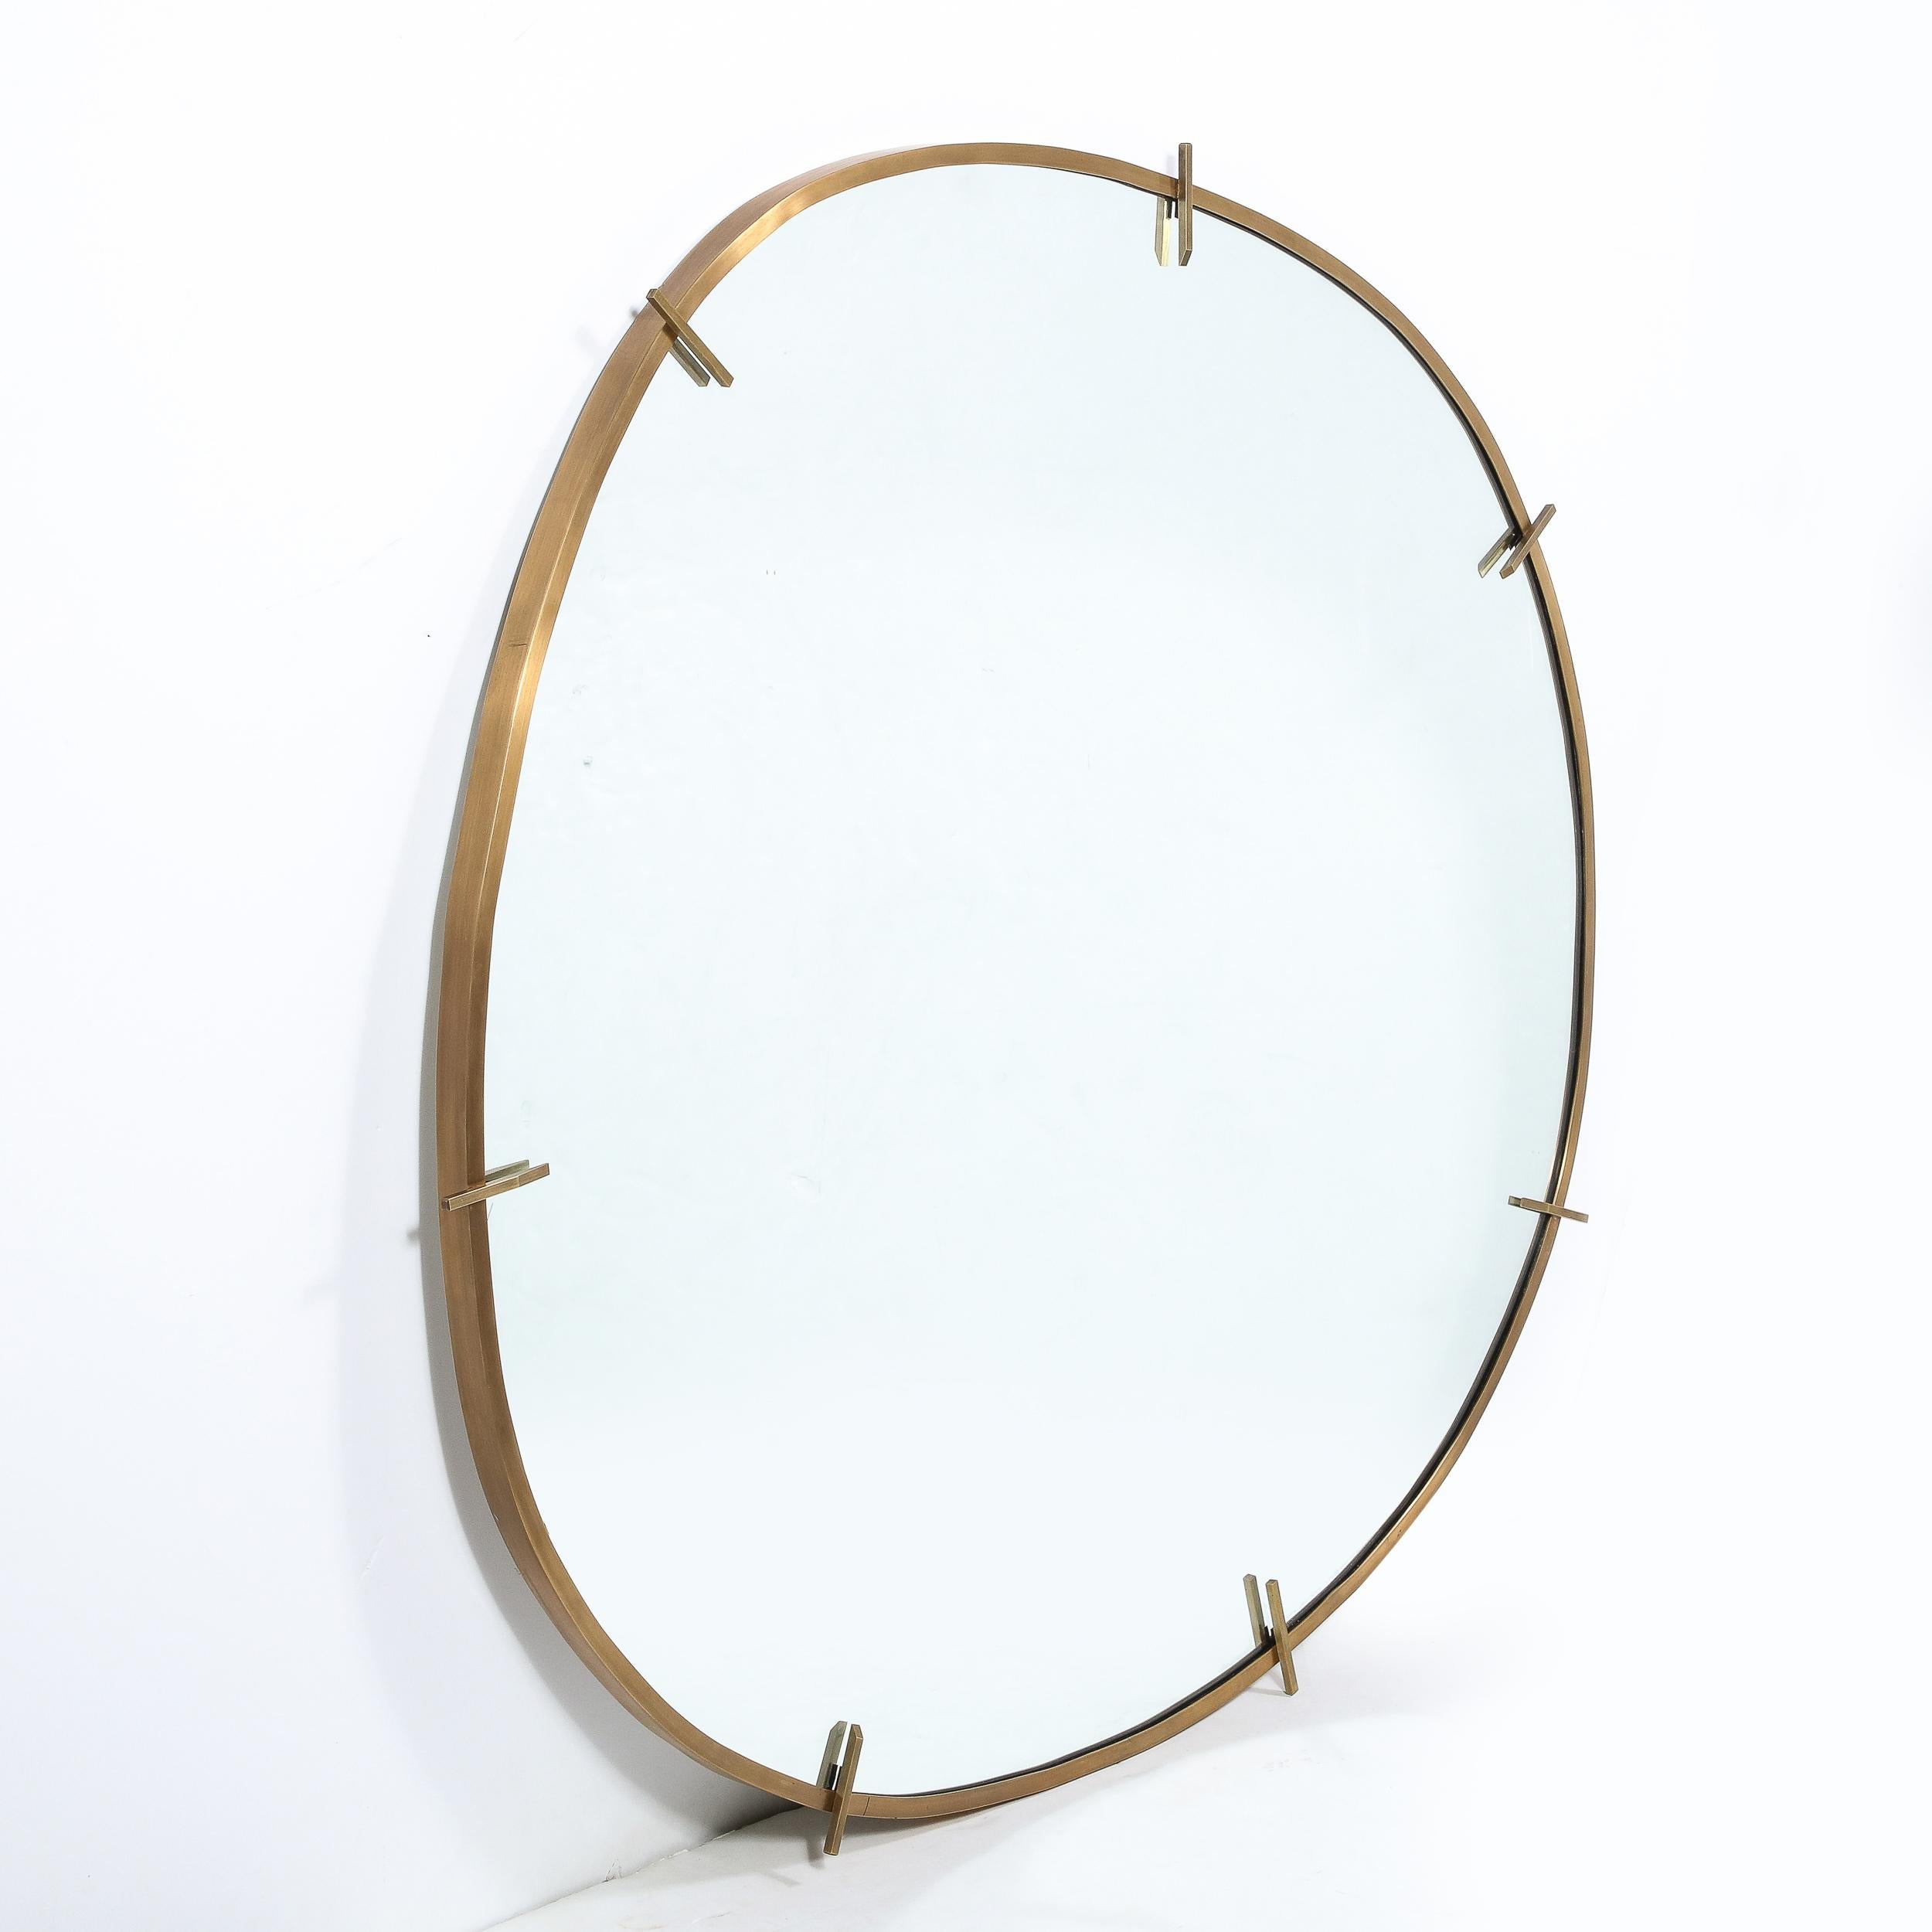 Handmade by our exclusive atelier, this refined mirror represents one of the few contemporary pieces that we carry, and for good reason. It embodies the old-world craftsmanship and lines of Mid-Century Modernist design that we treasure. It is an